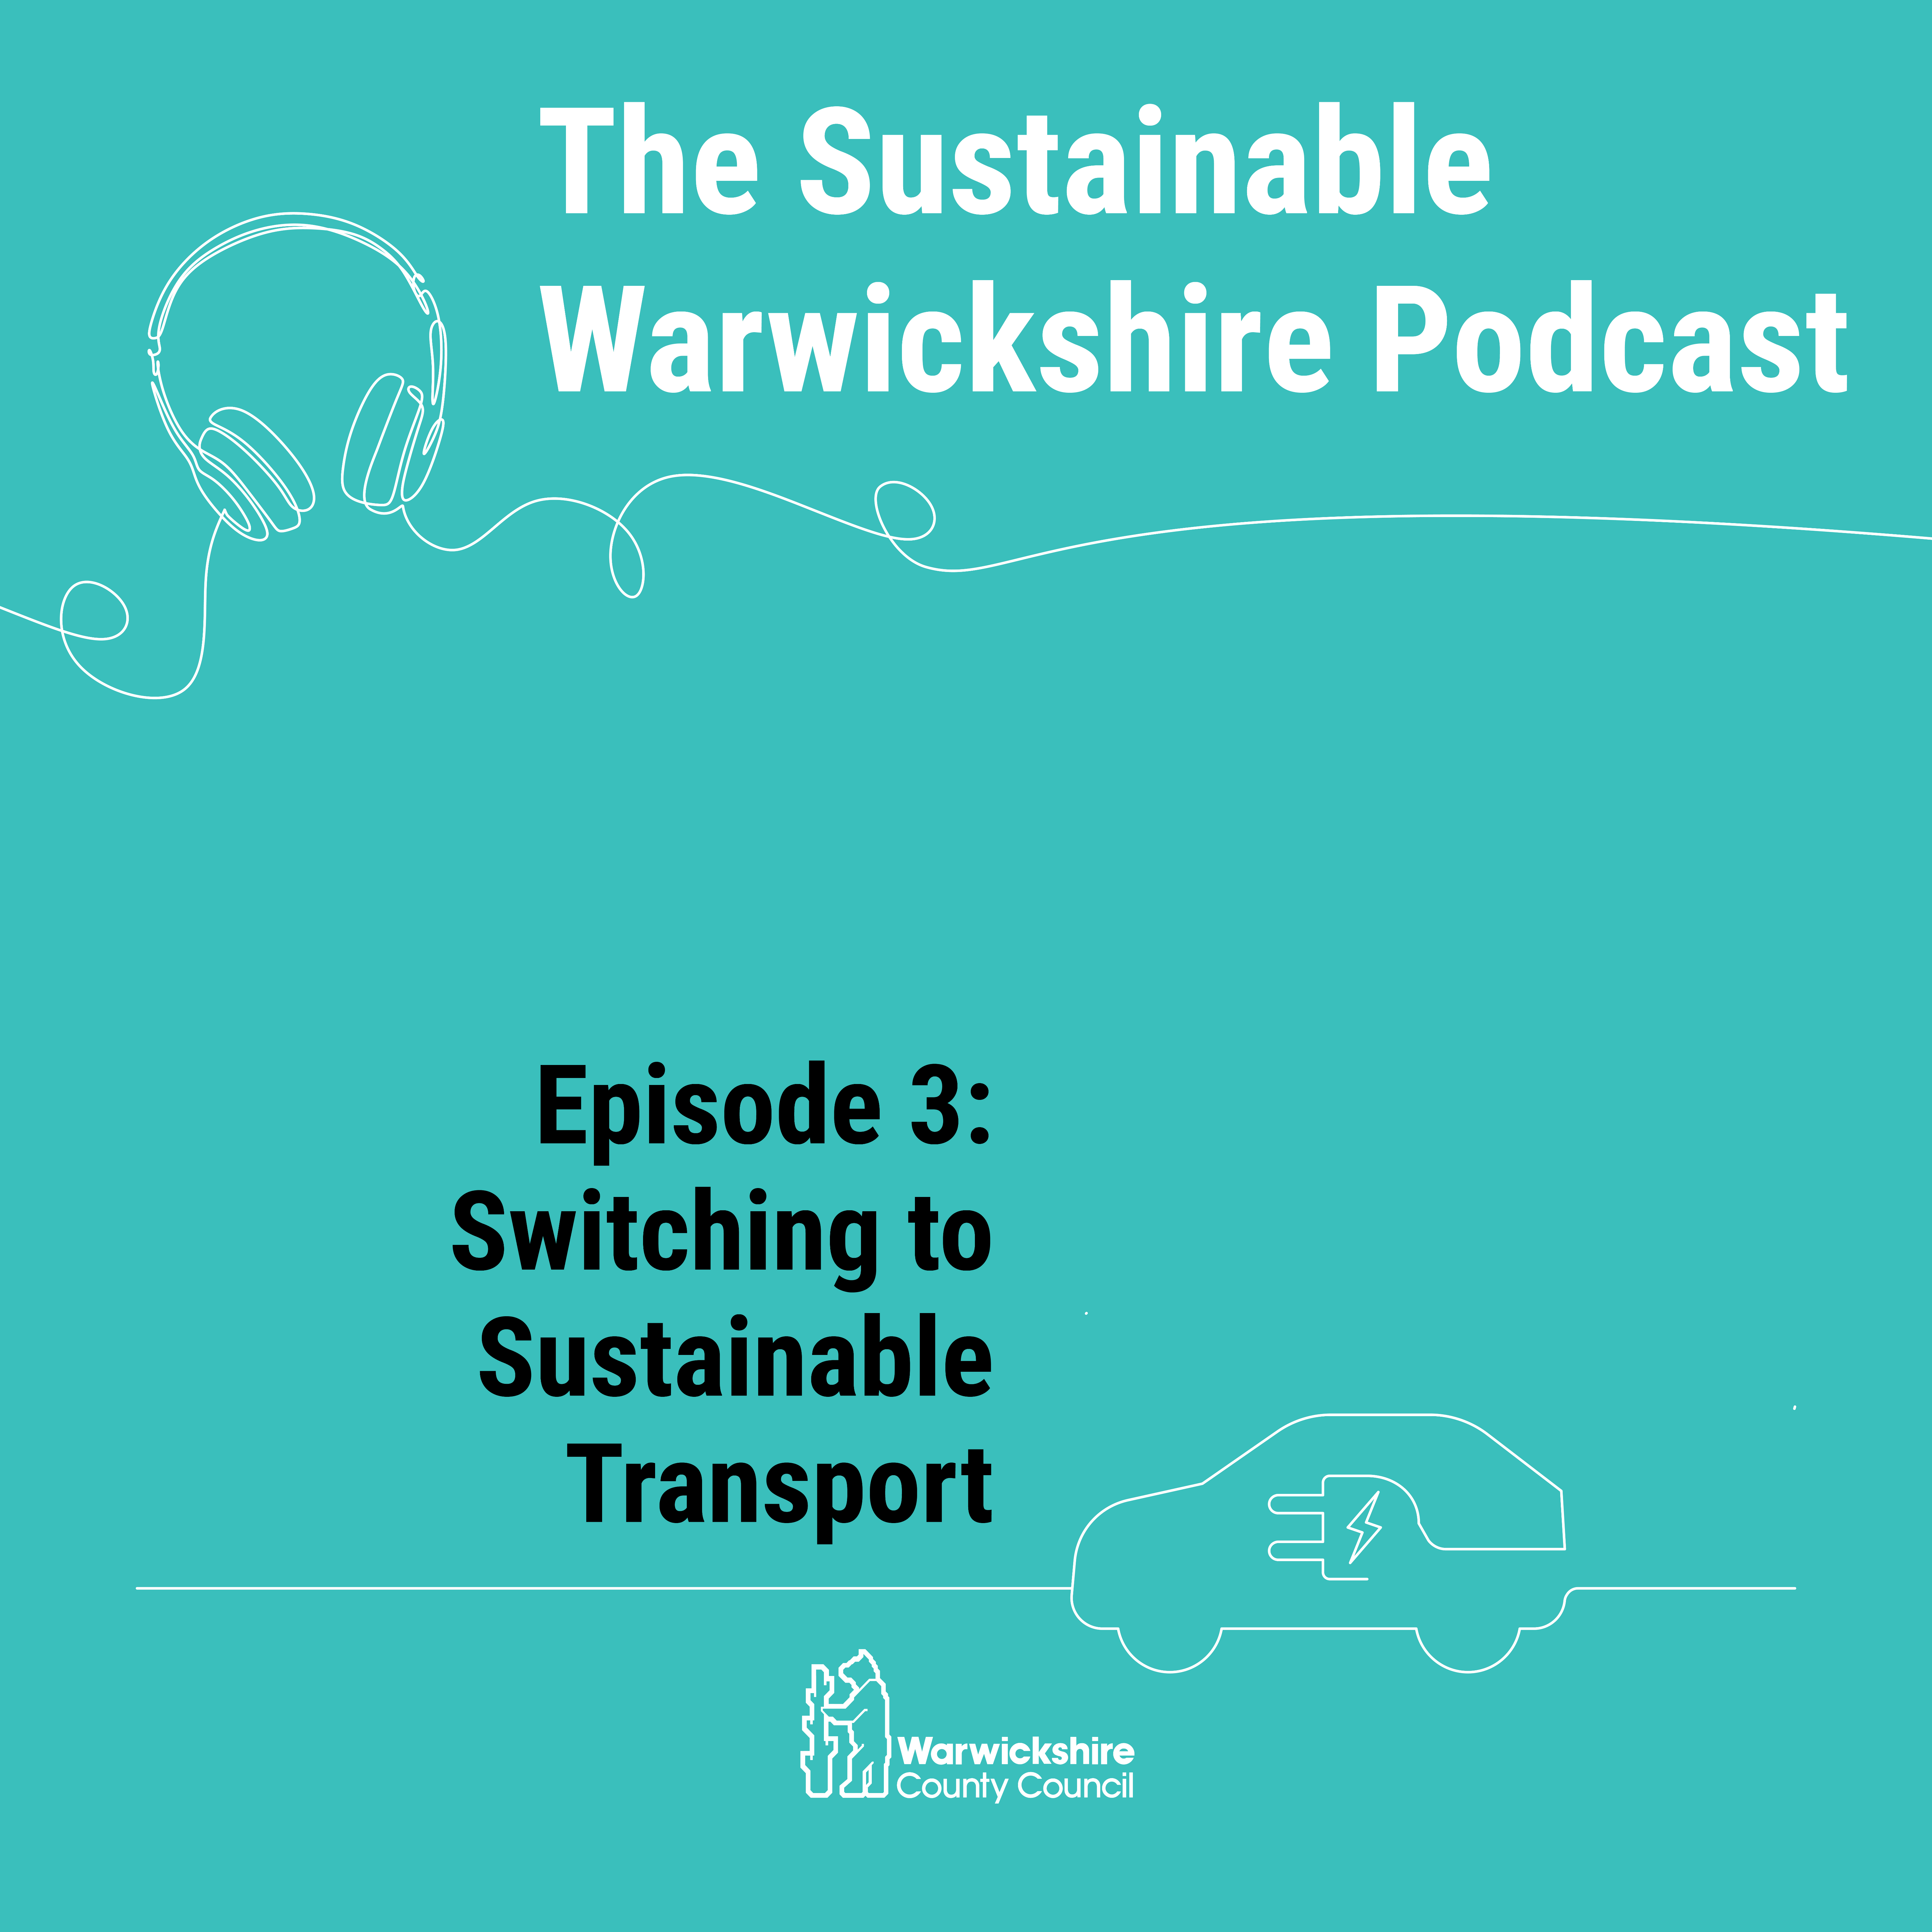 New Sustainable Warwickshire Podcast Explores Strategies for Increasing Cycling and Reducing Carbon Emissions